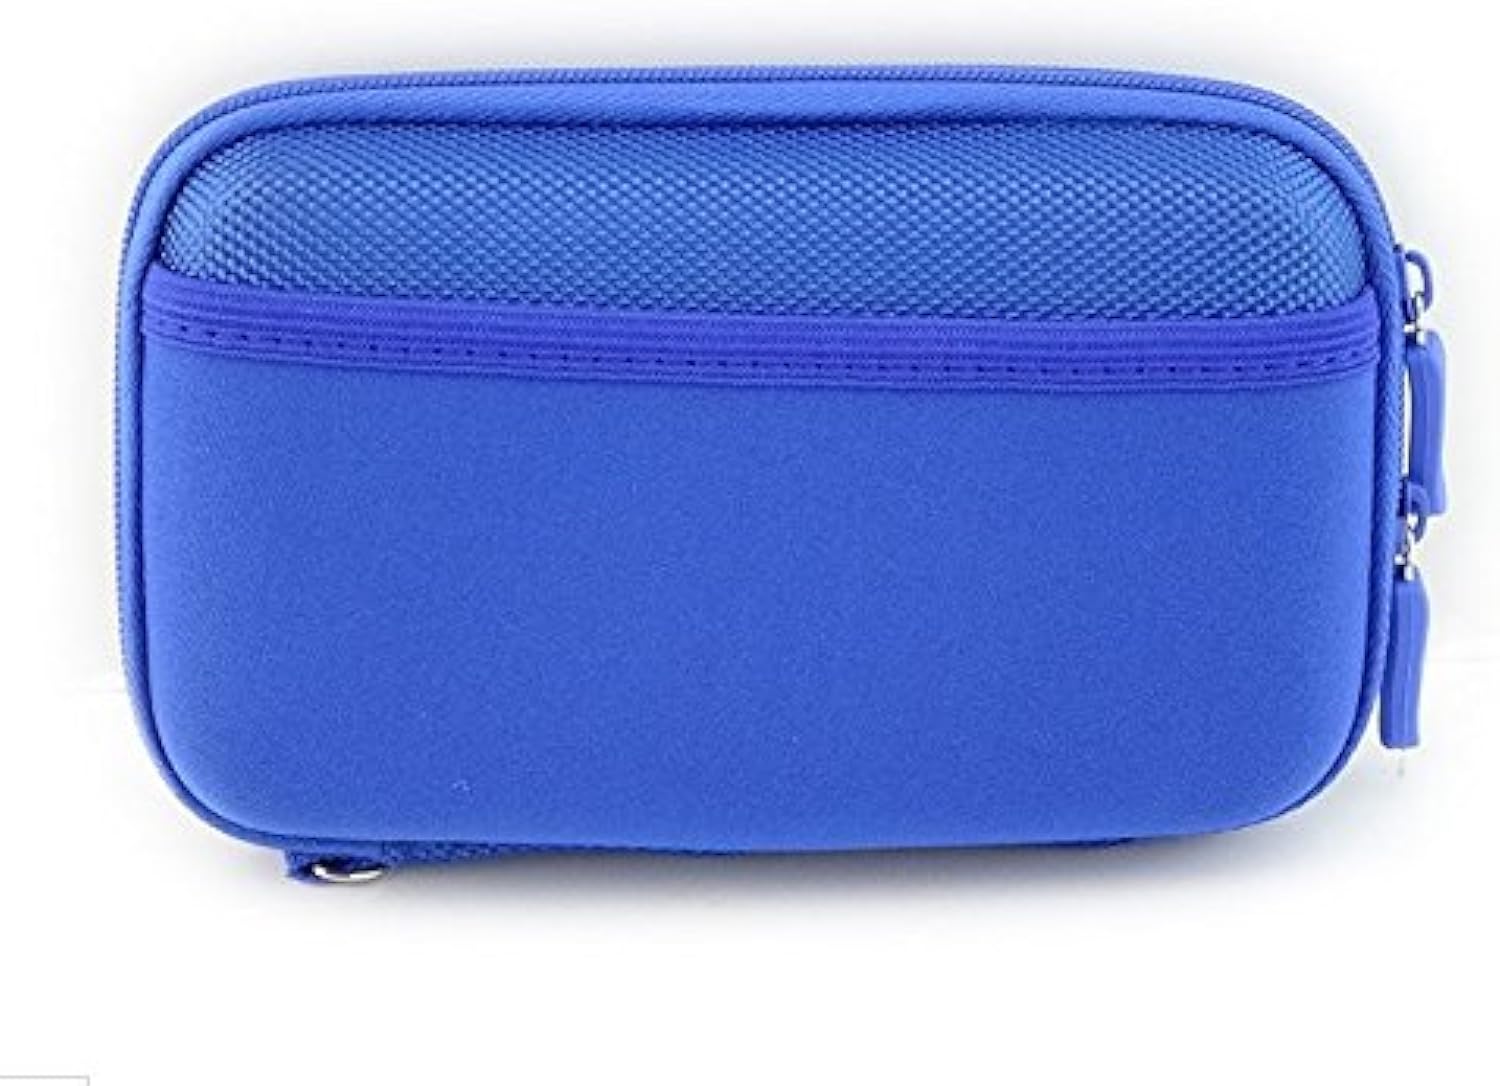 Small Protective Hard Shell Diabetic Travel Case Testing Kit Organizer Review